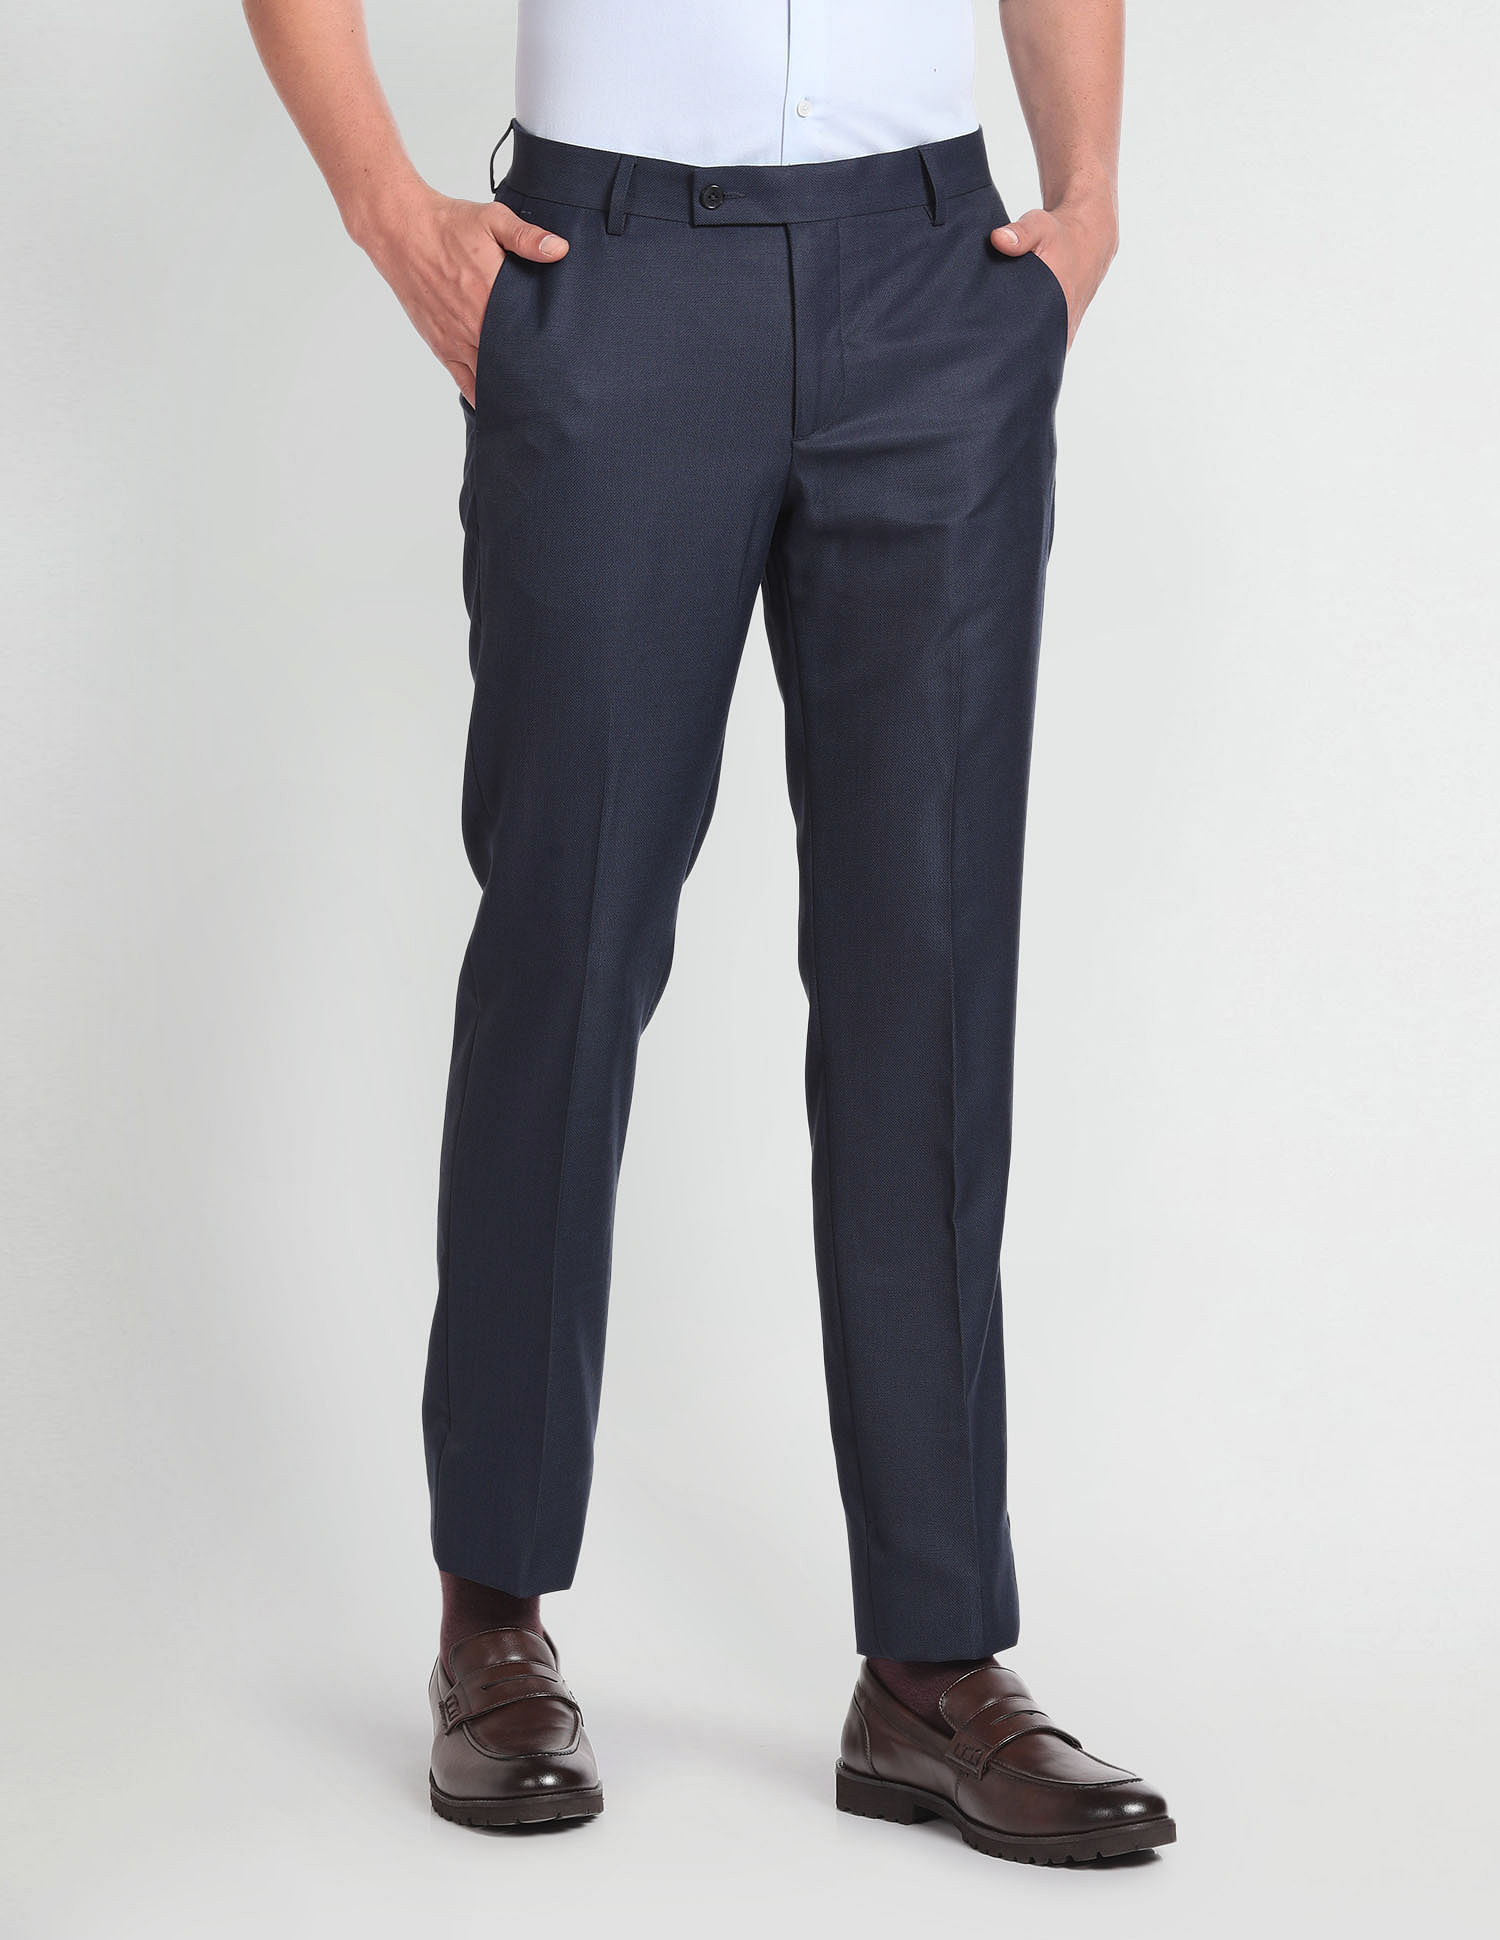 Buy Arrow Tailored Regular Fit Heathered Formal Trousers - NNNOW.com